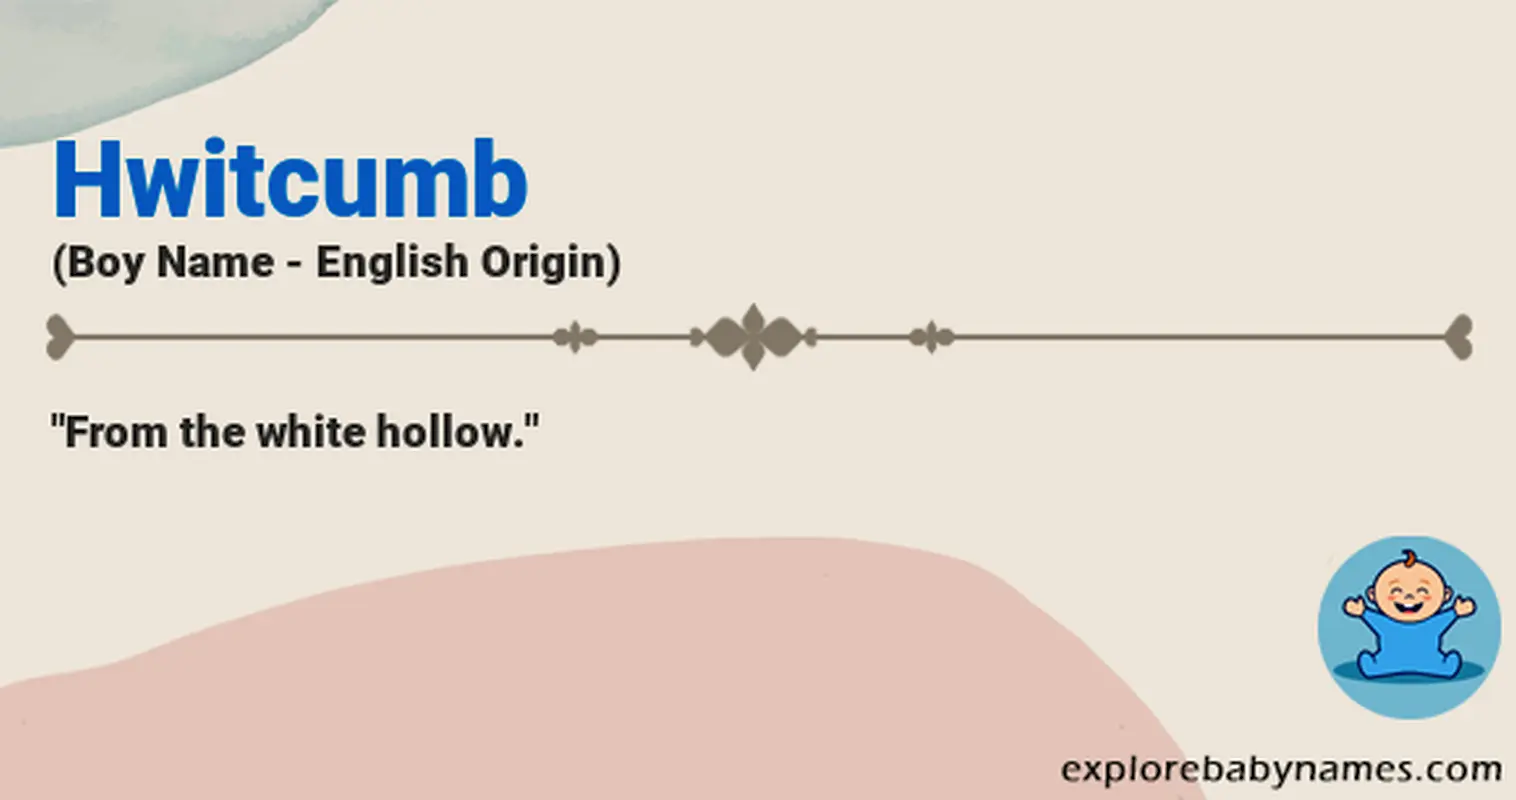 Meaning of Hwitcumb